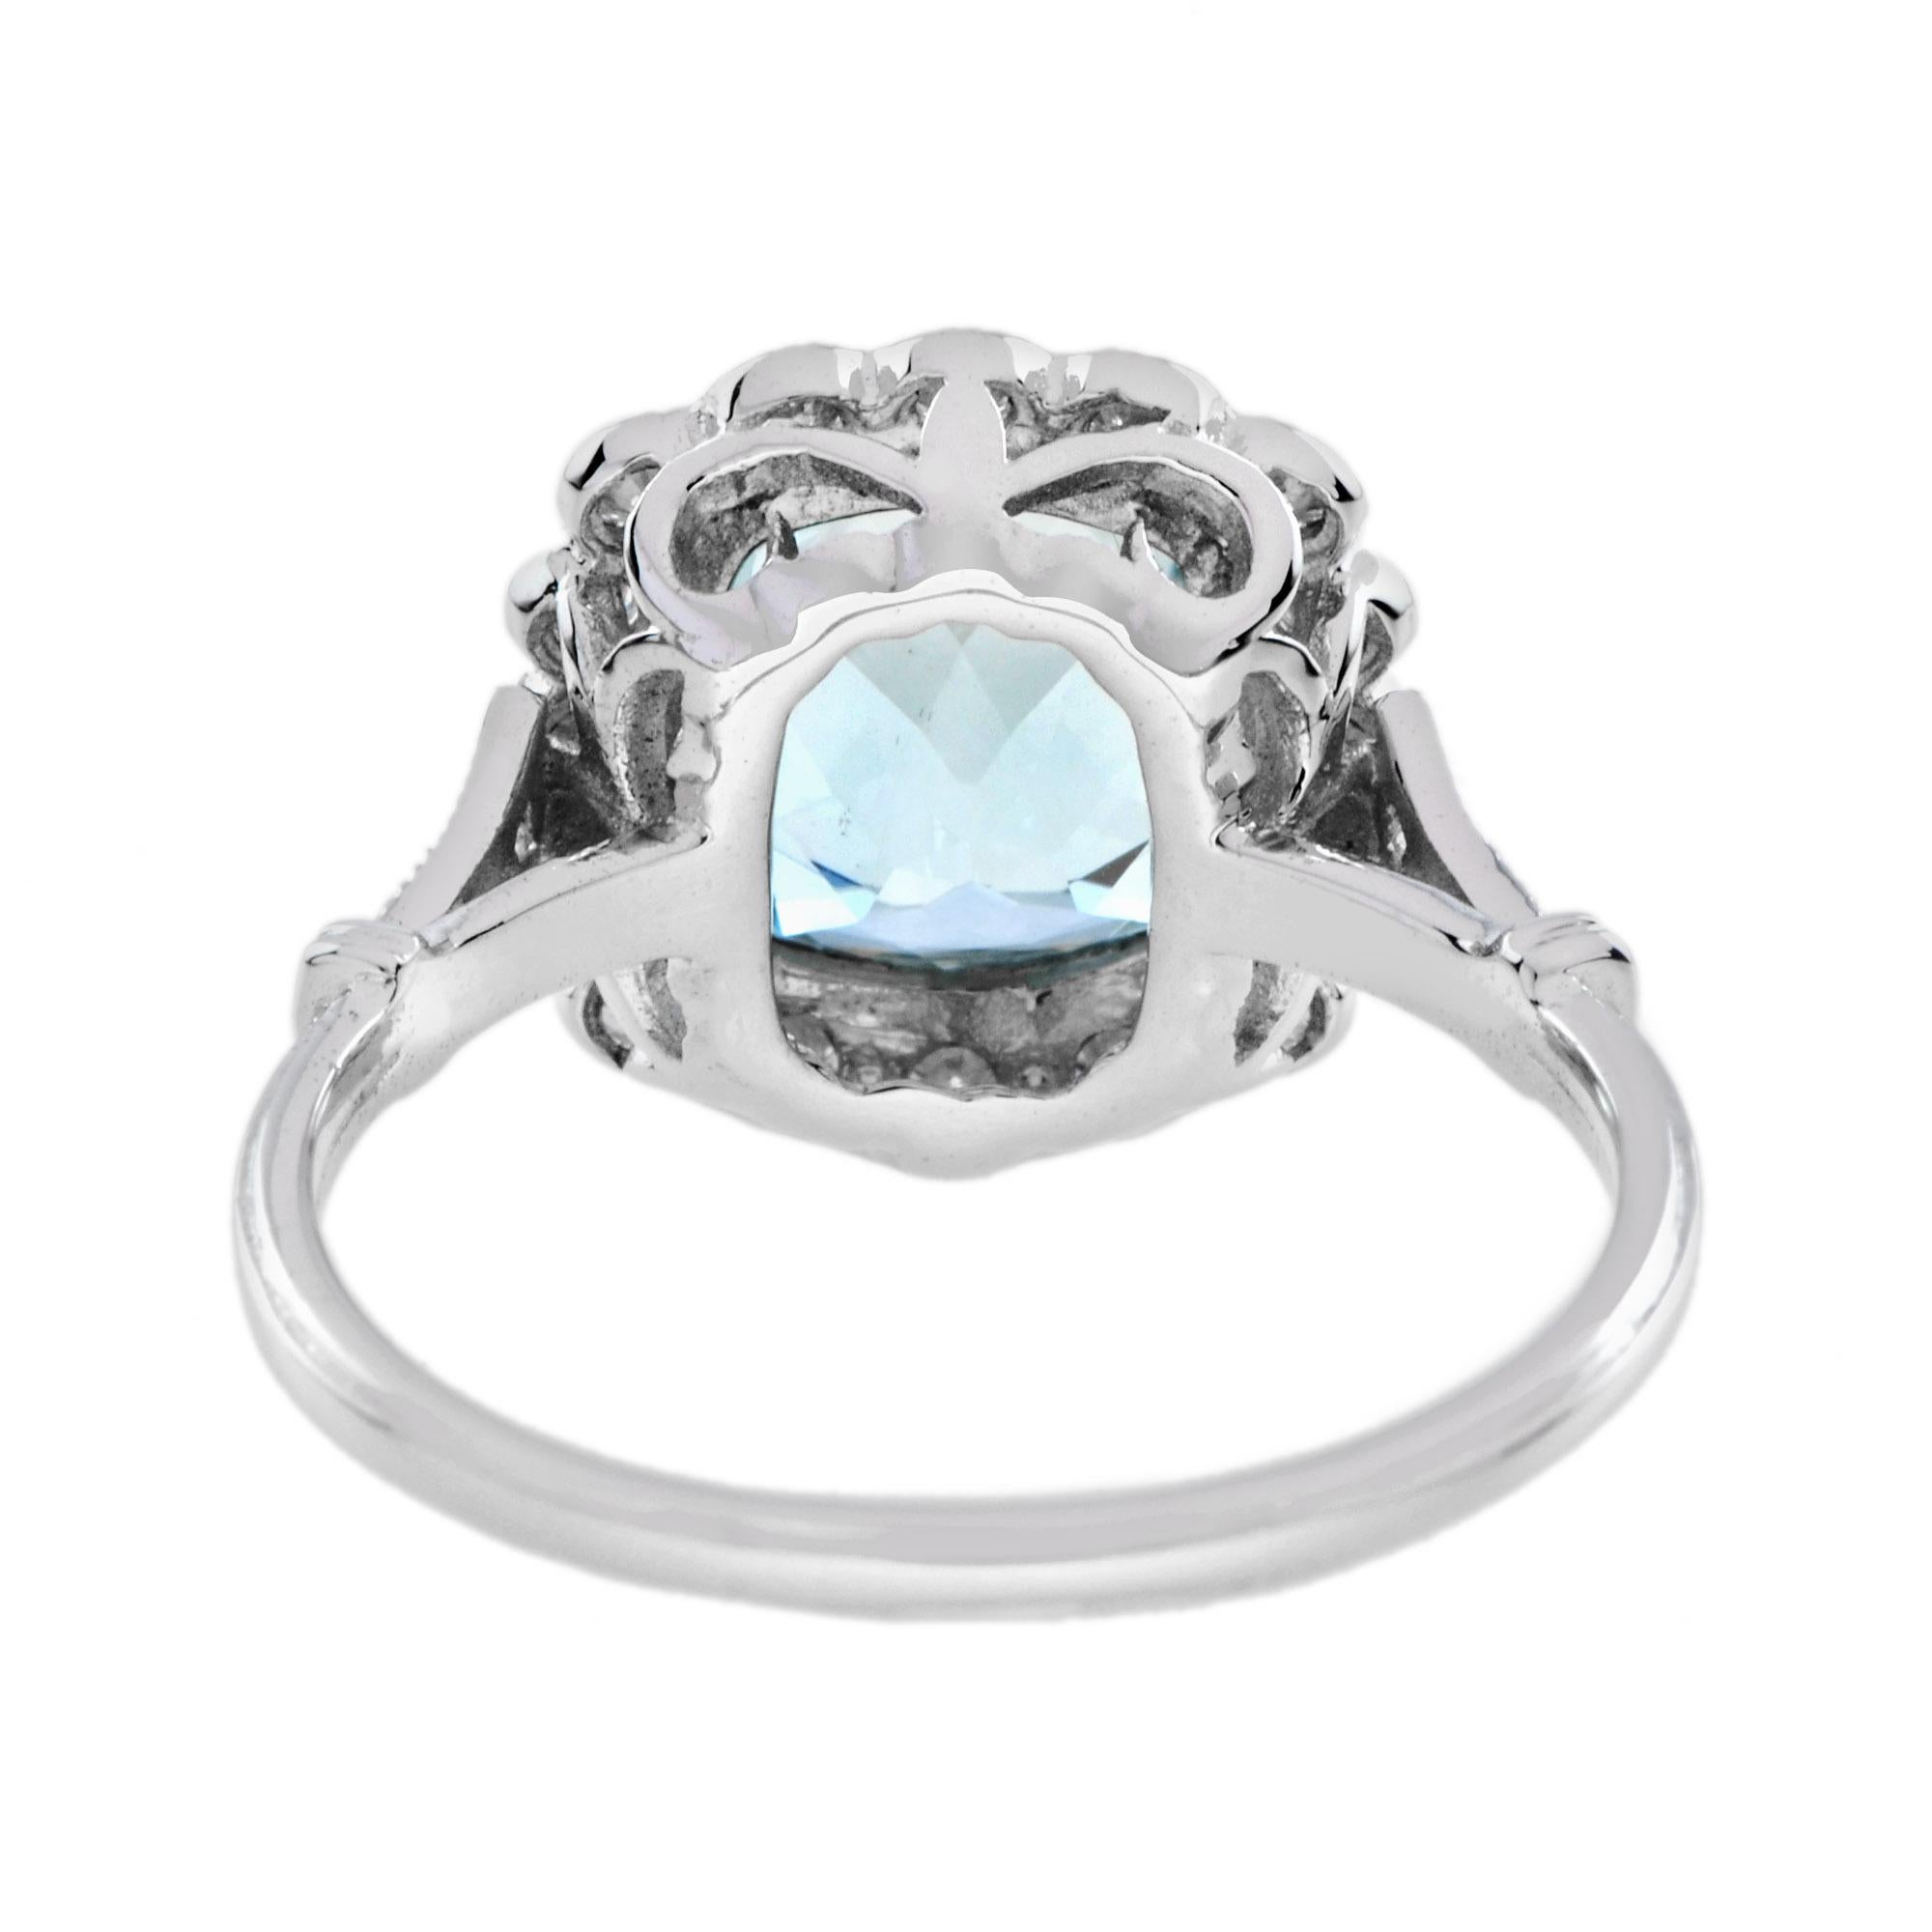 For Sale:  Cushion Aquamarine and Diamond Halo Ring in 18K White Gold 7